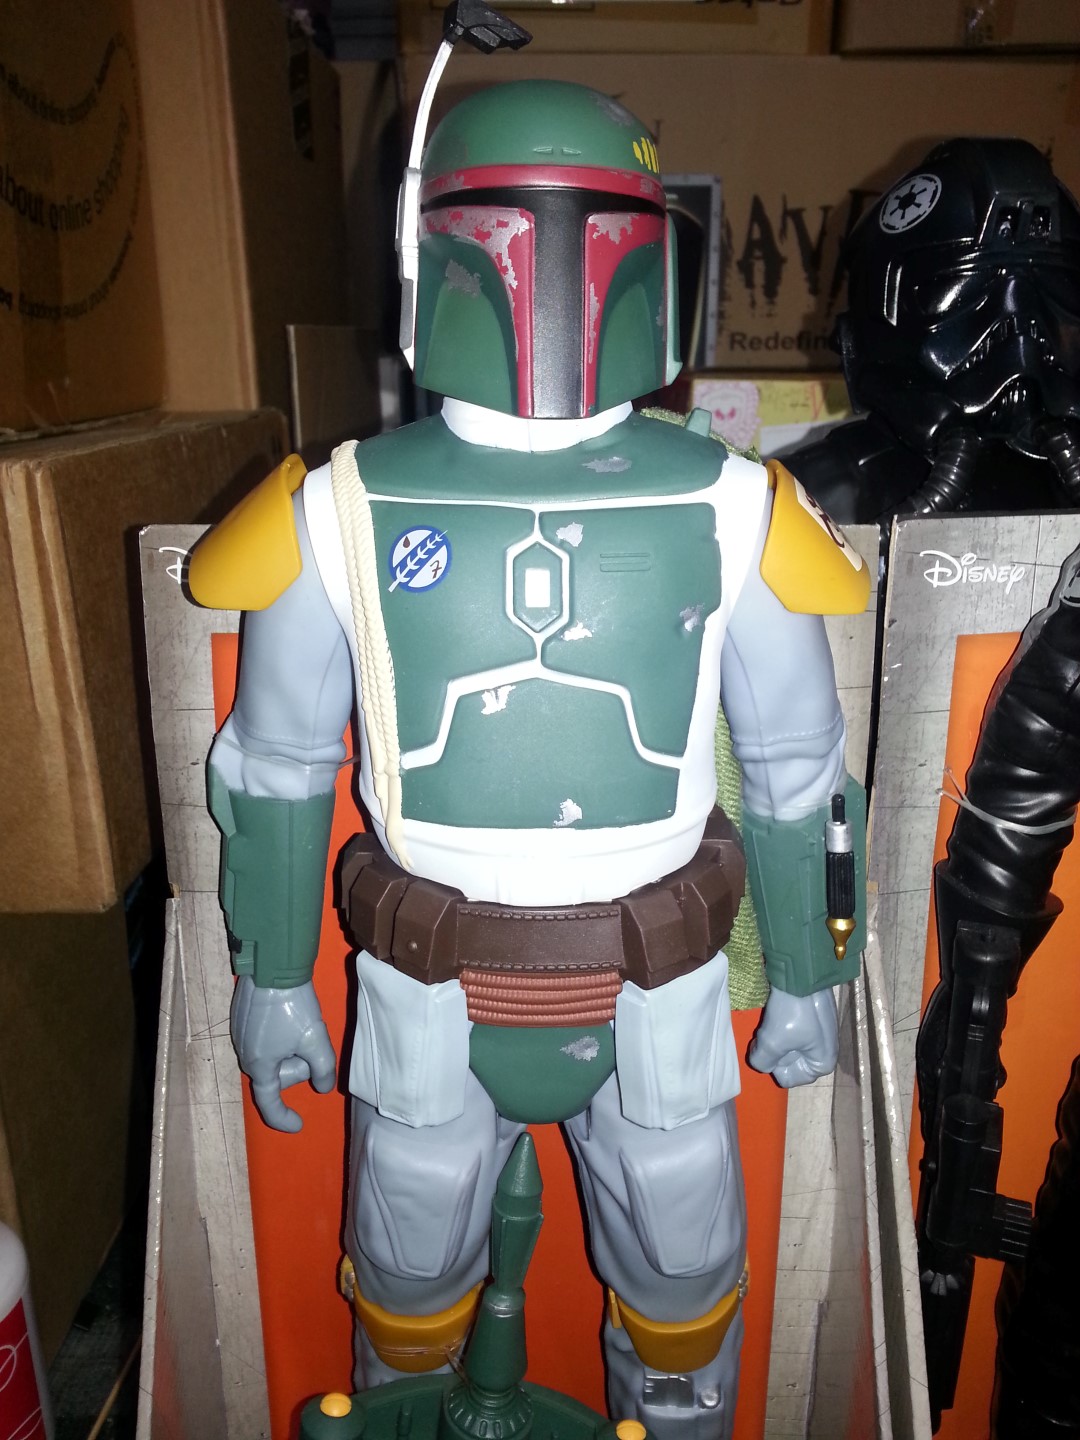 Boba Fett Looks Great for this size. Lots of details.